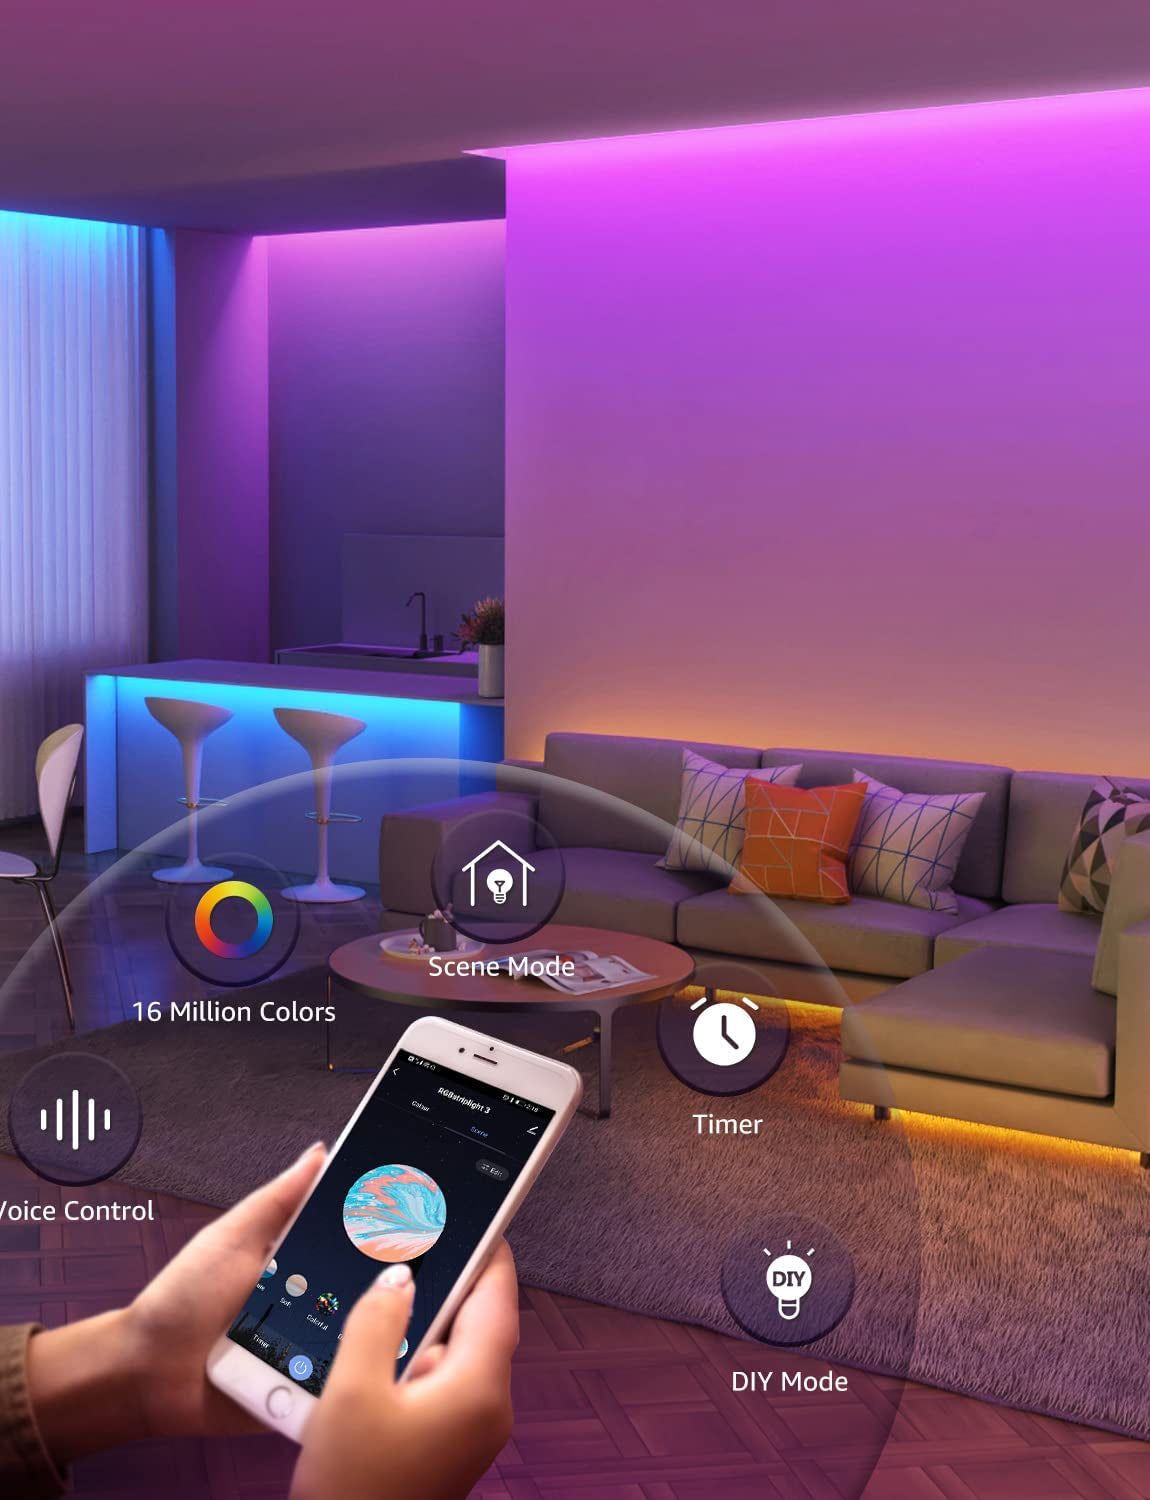 Lighting in a living room is remotely controlled through an application in mobile device